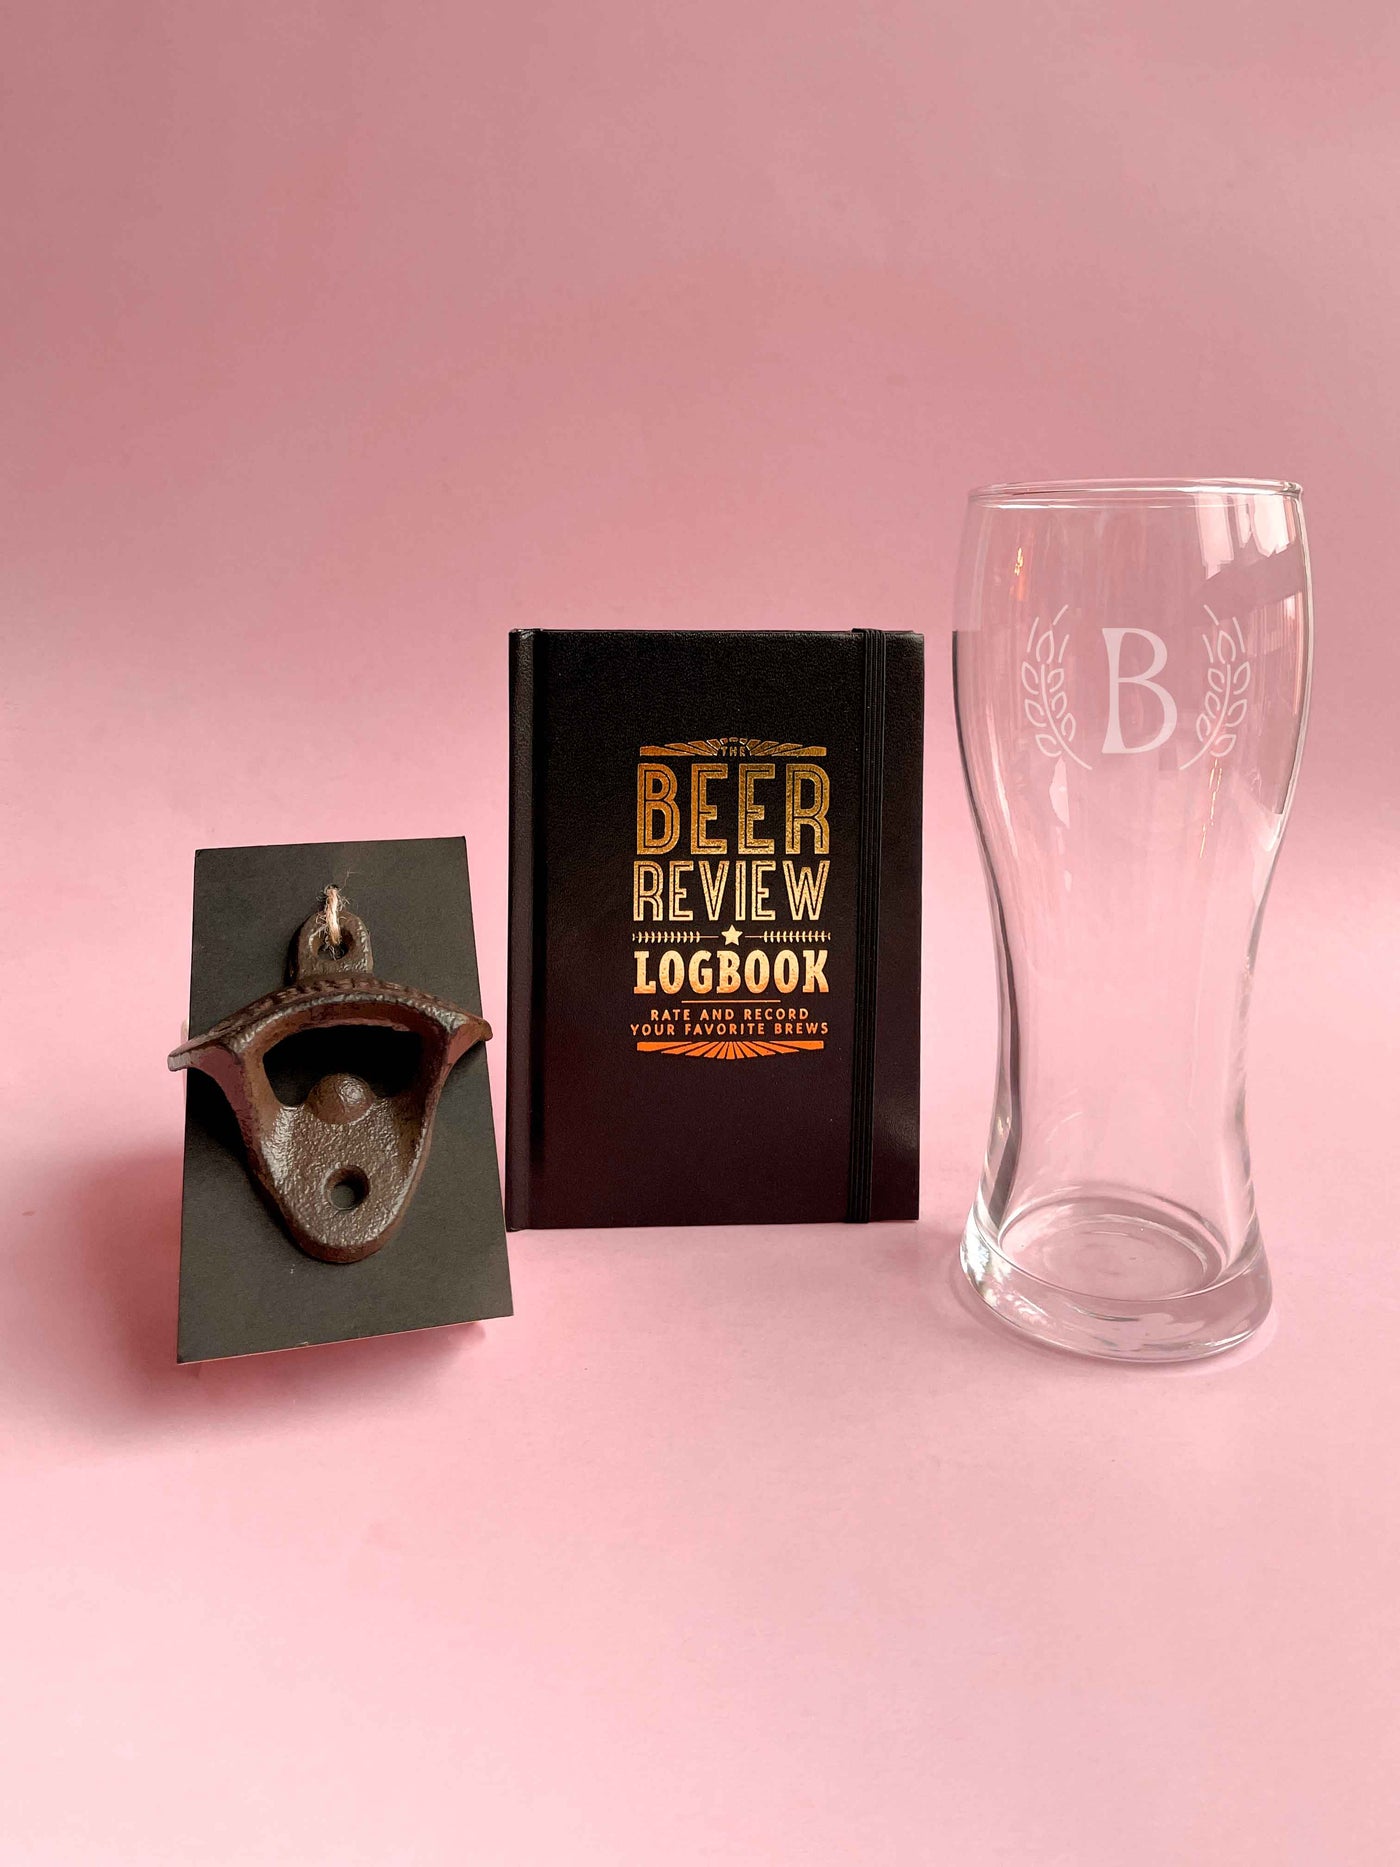 The Professional Beer Taster Gift Box - Personalize it!